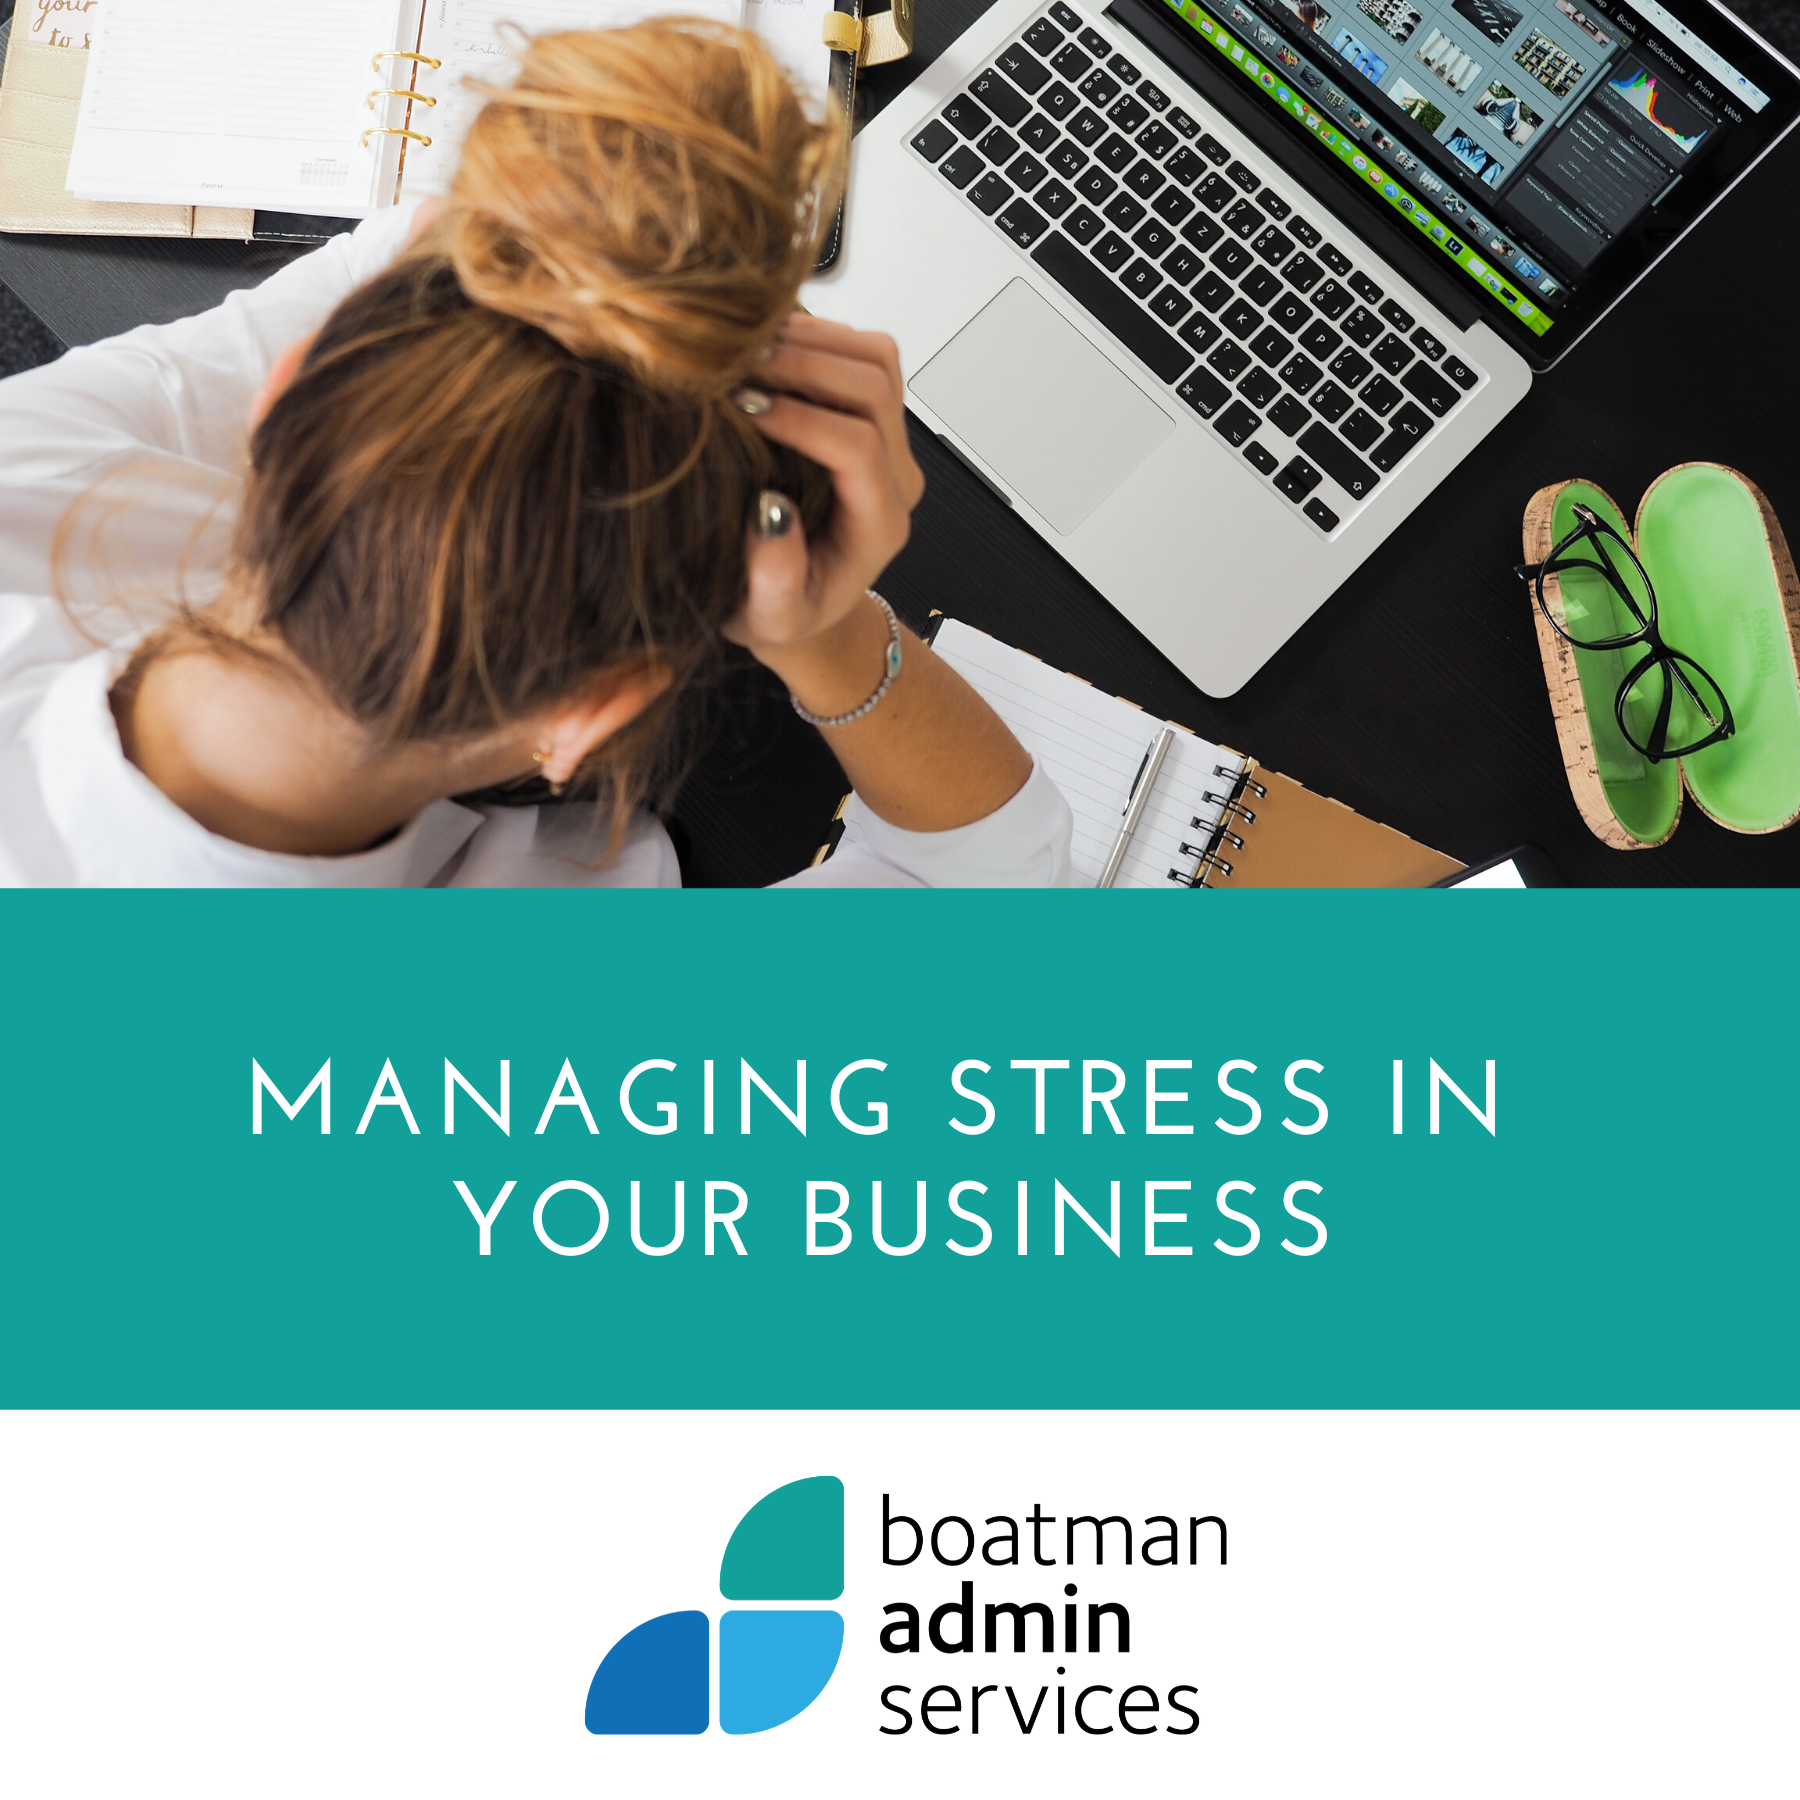 Tips for Managing Stress in your Business